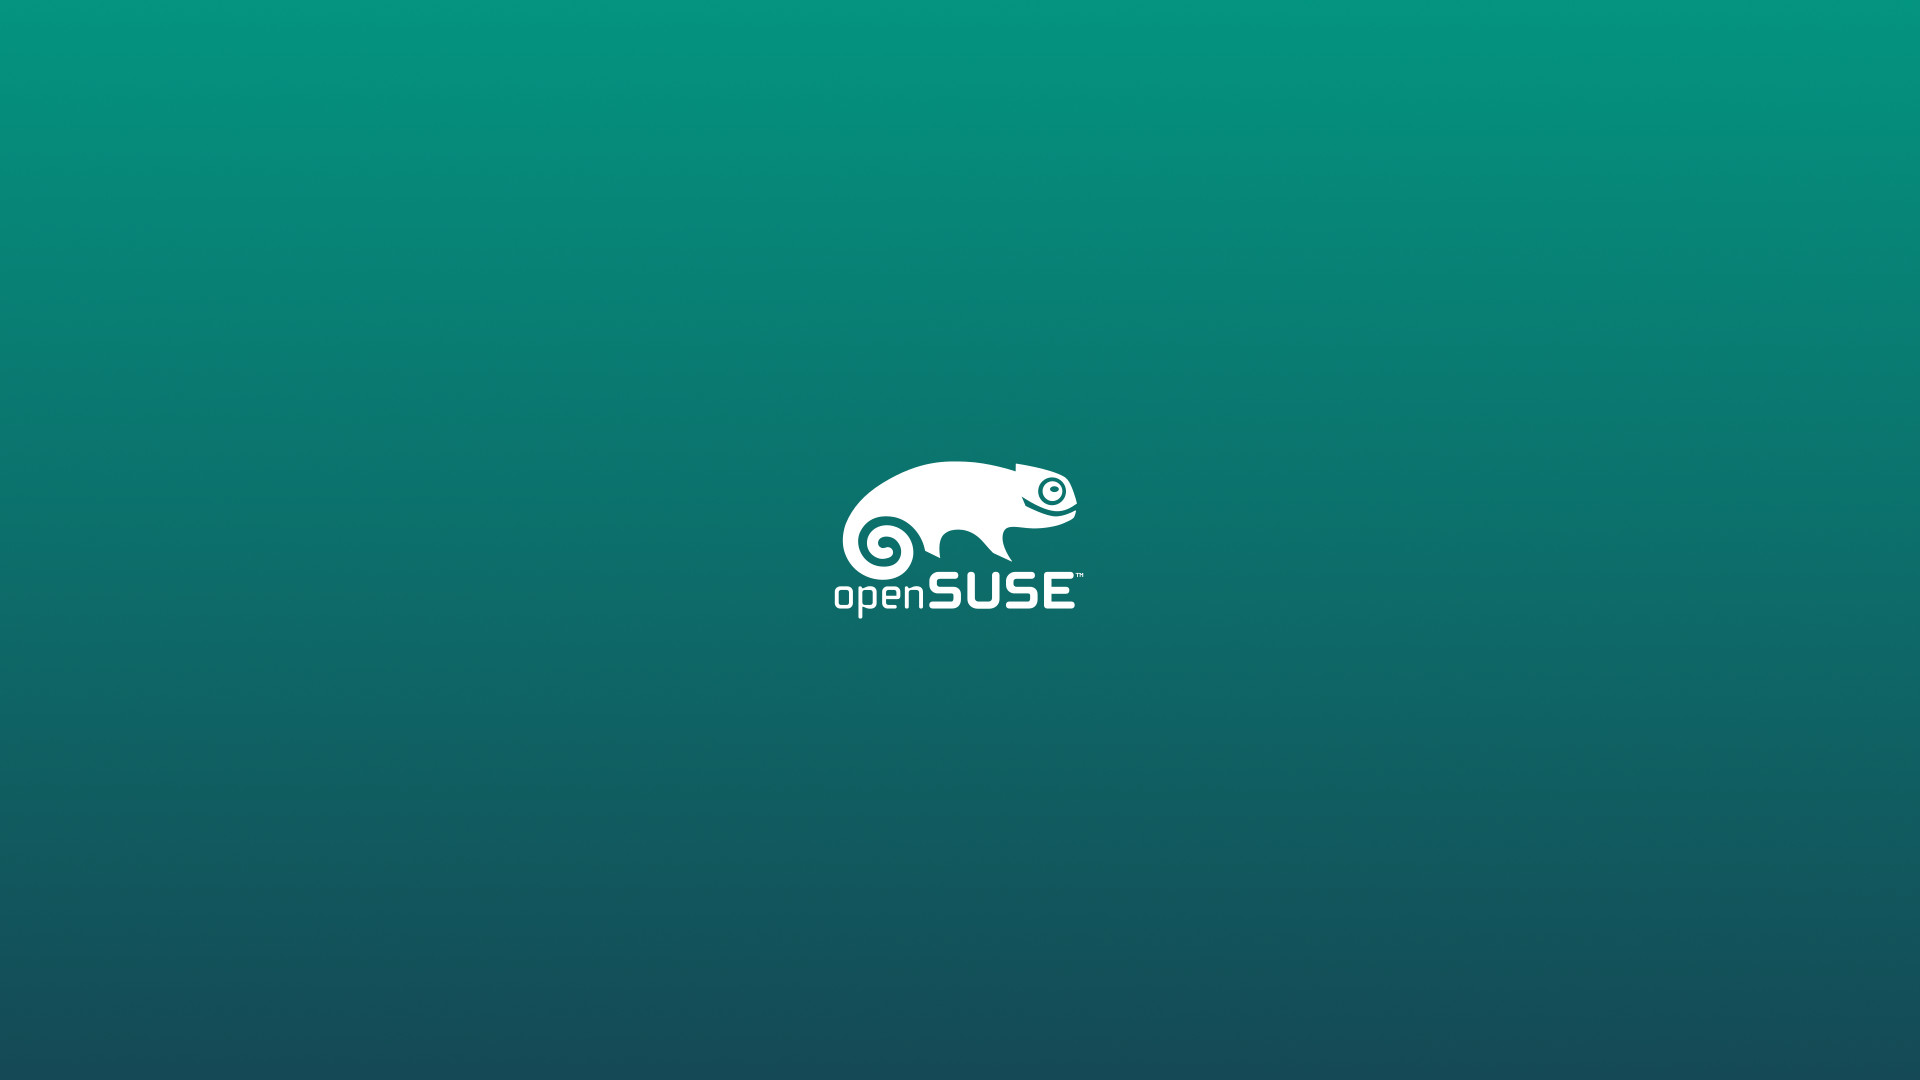 Opensuse Wallpaper Image